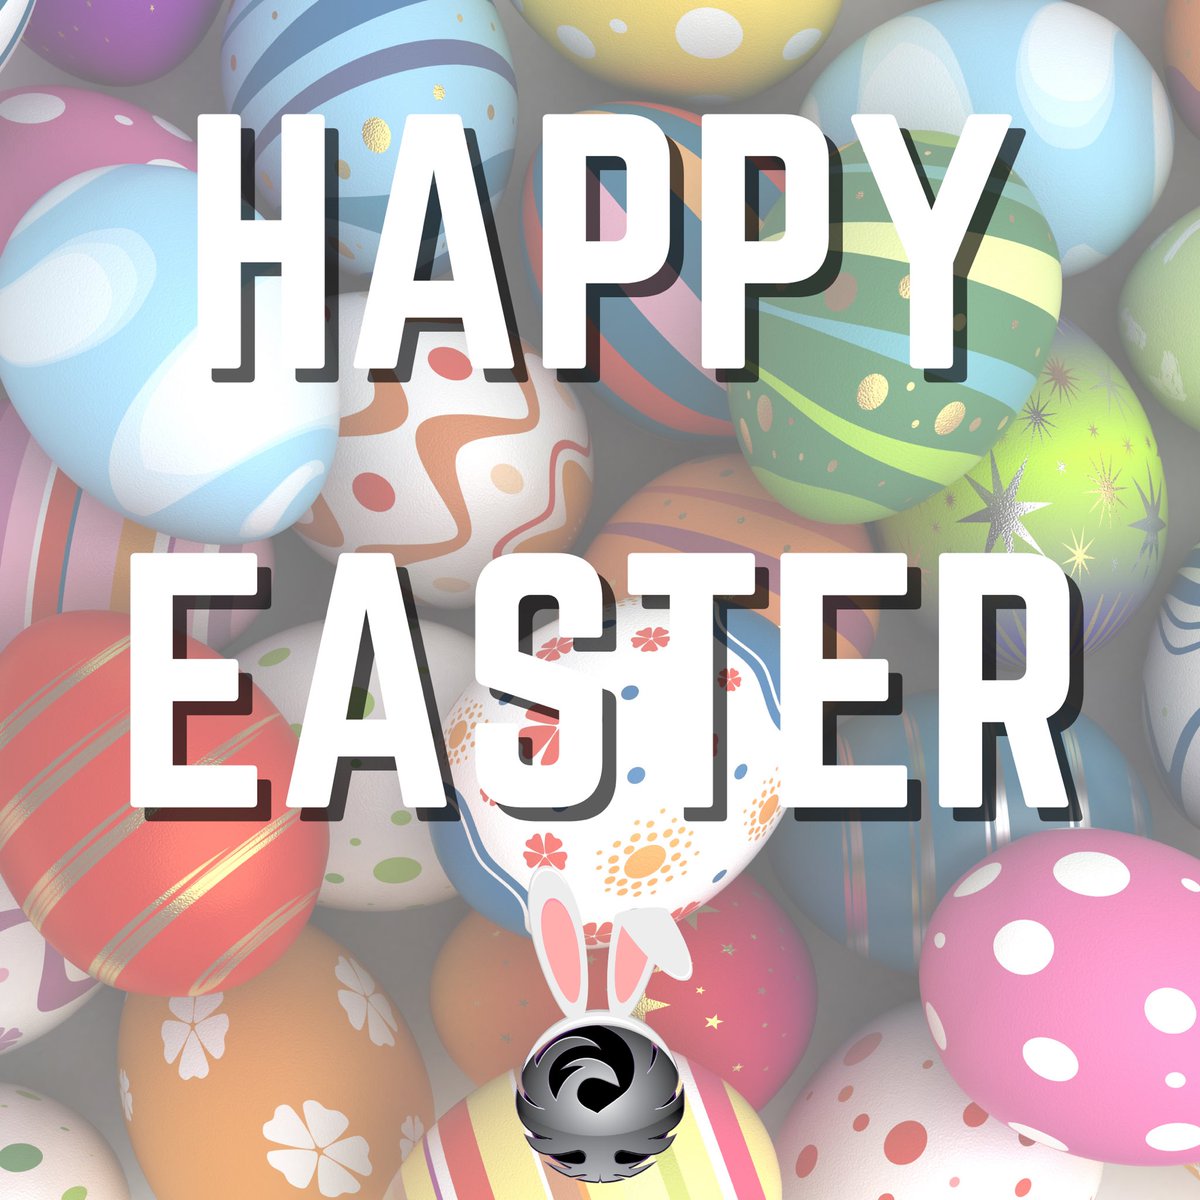 From our #FenixFam to yours! 🐣🐰🎉